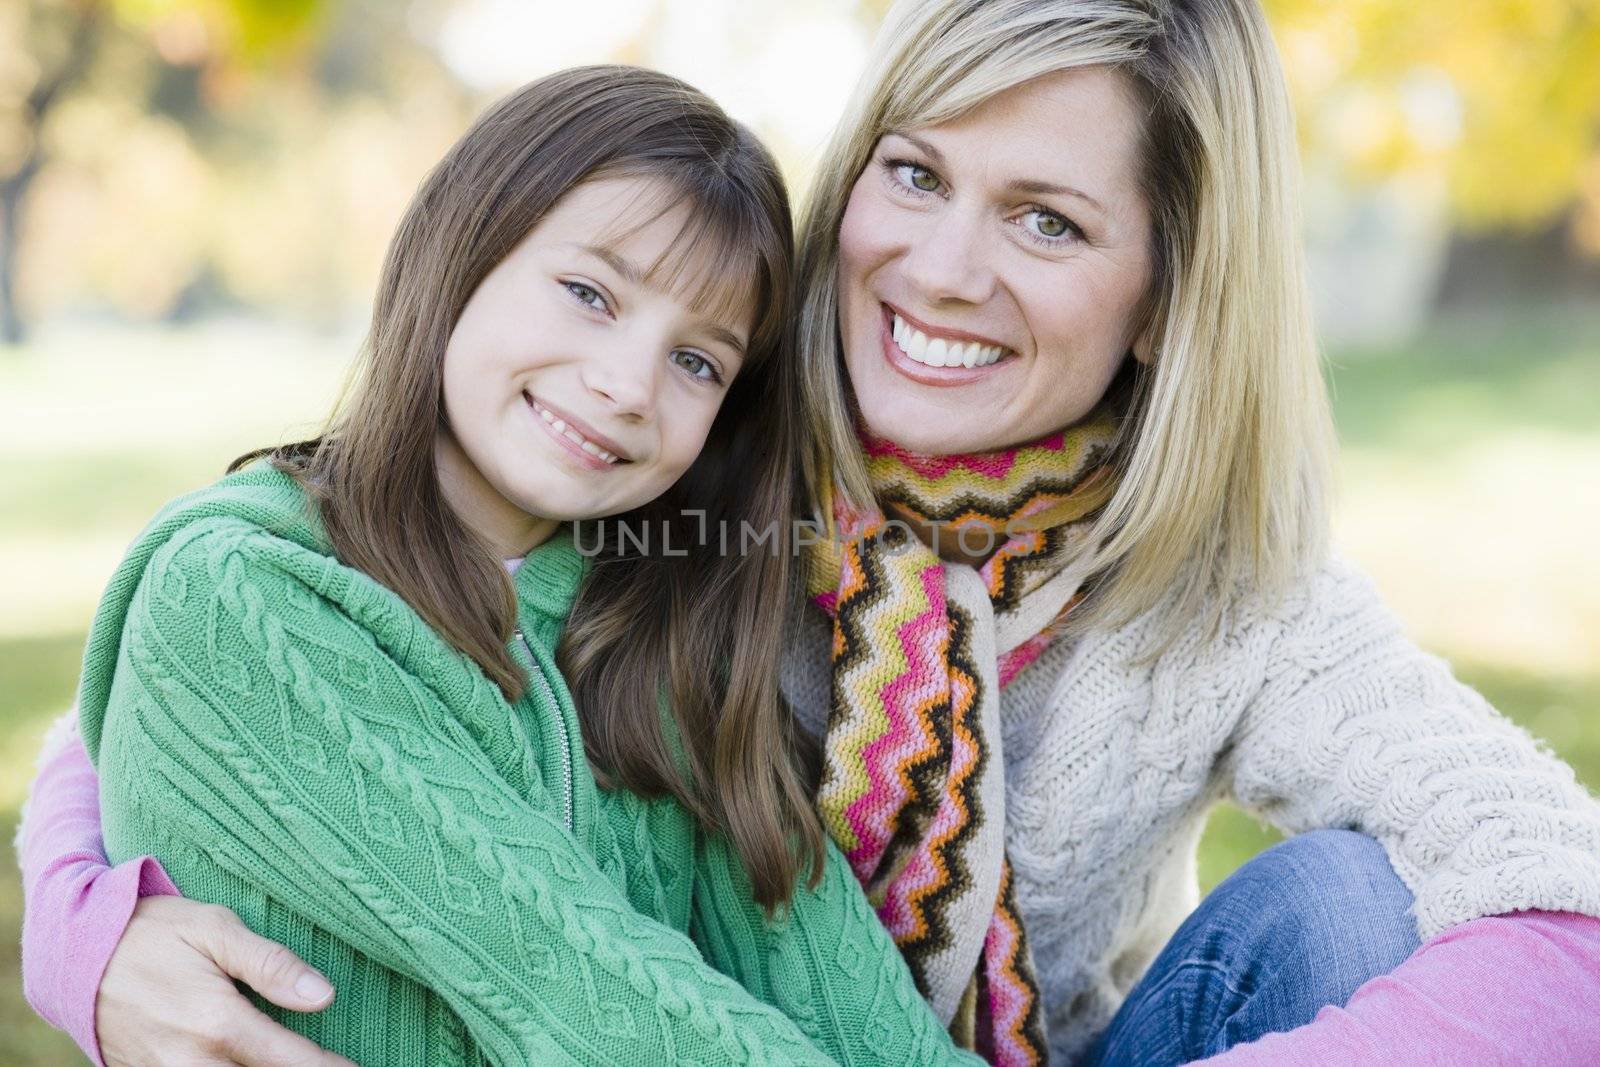 Portrait of a Mother and Daughter Sitting Together in a Park